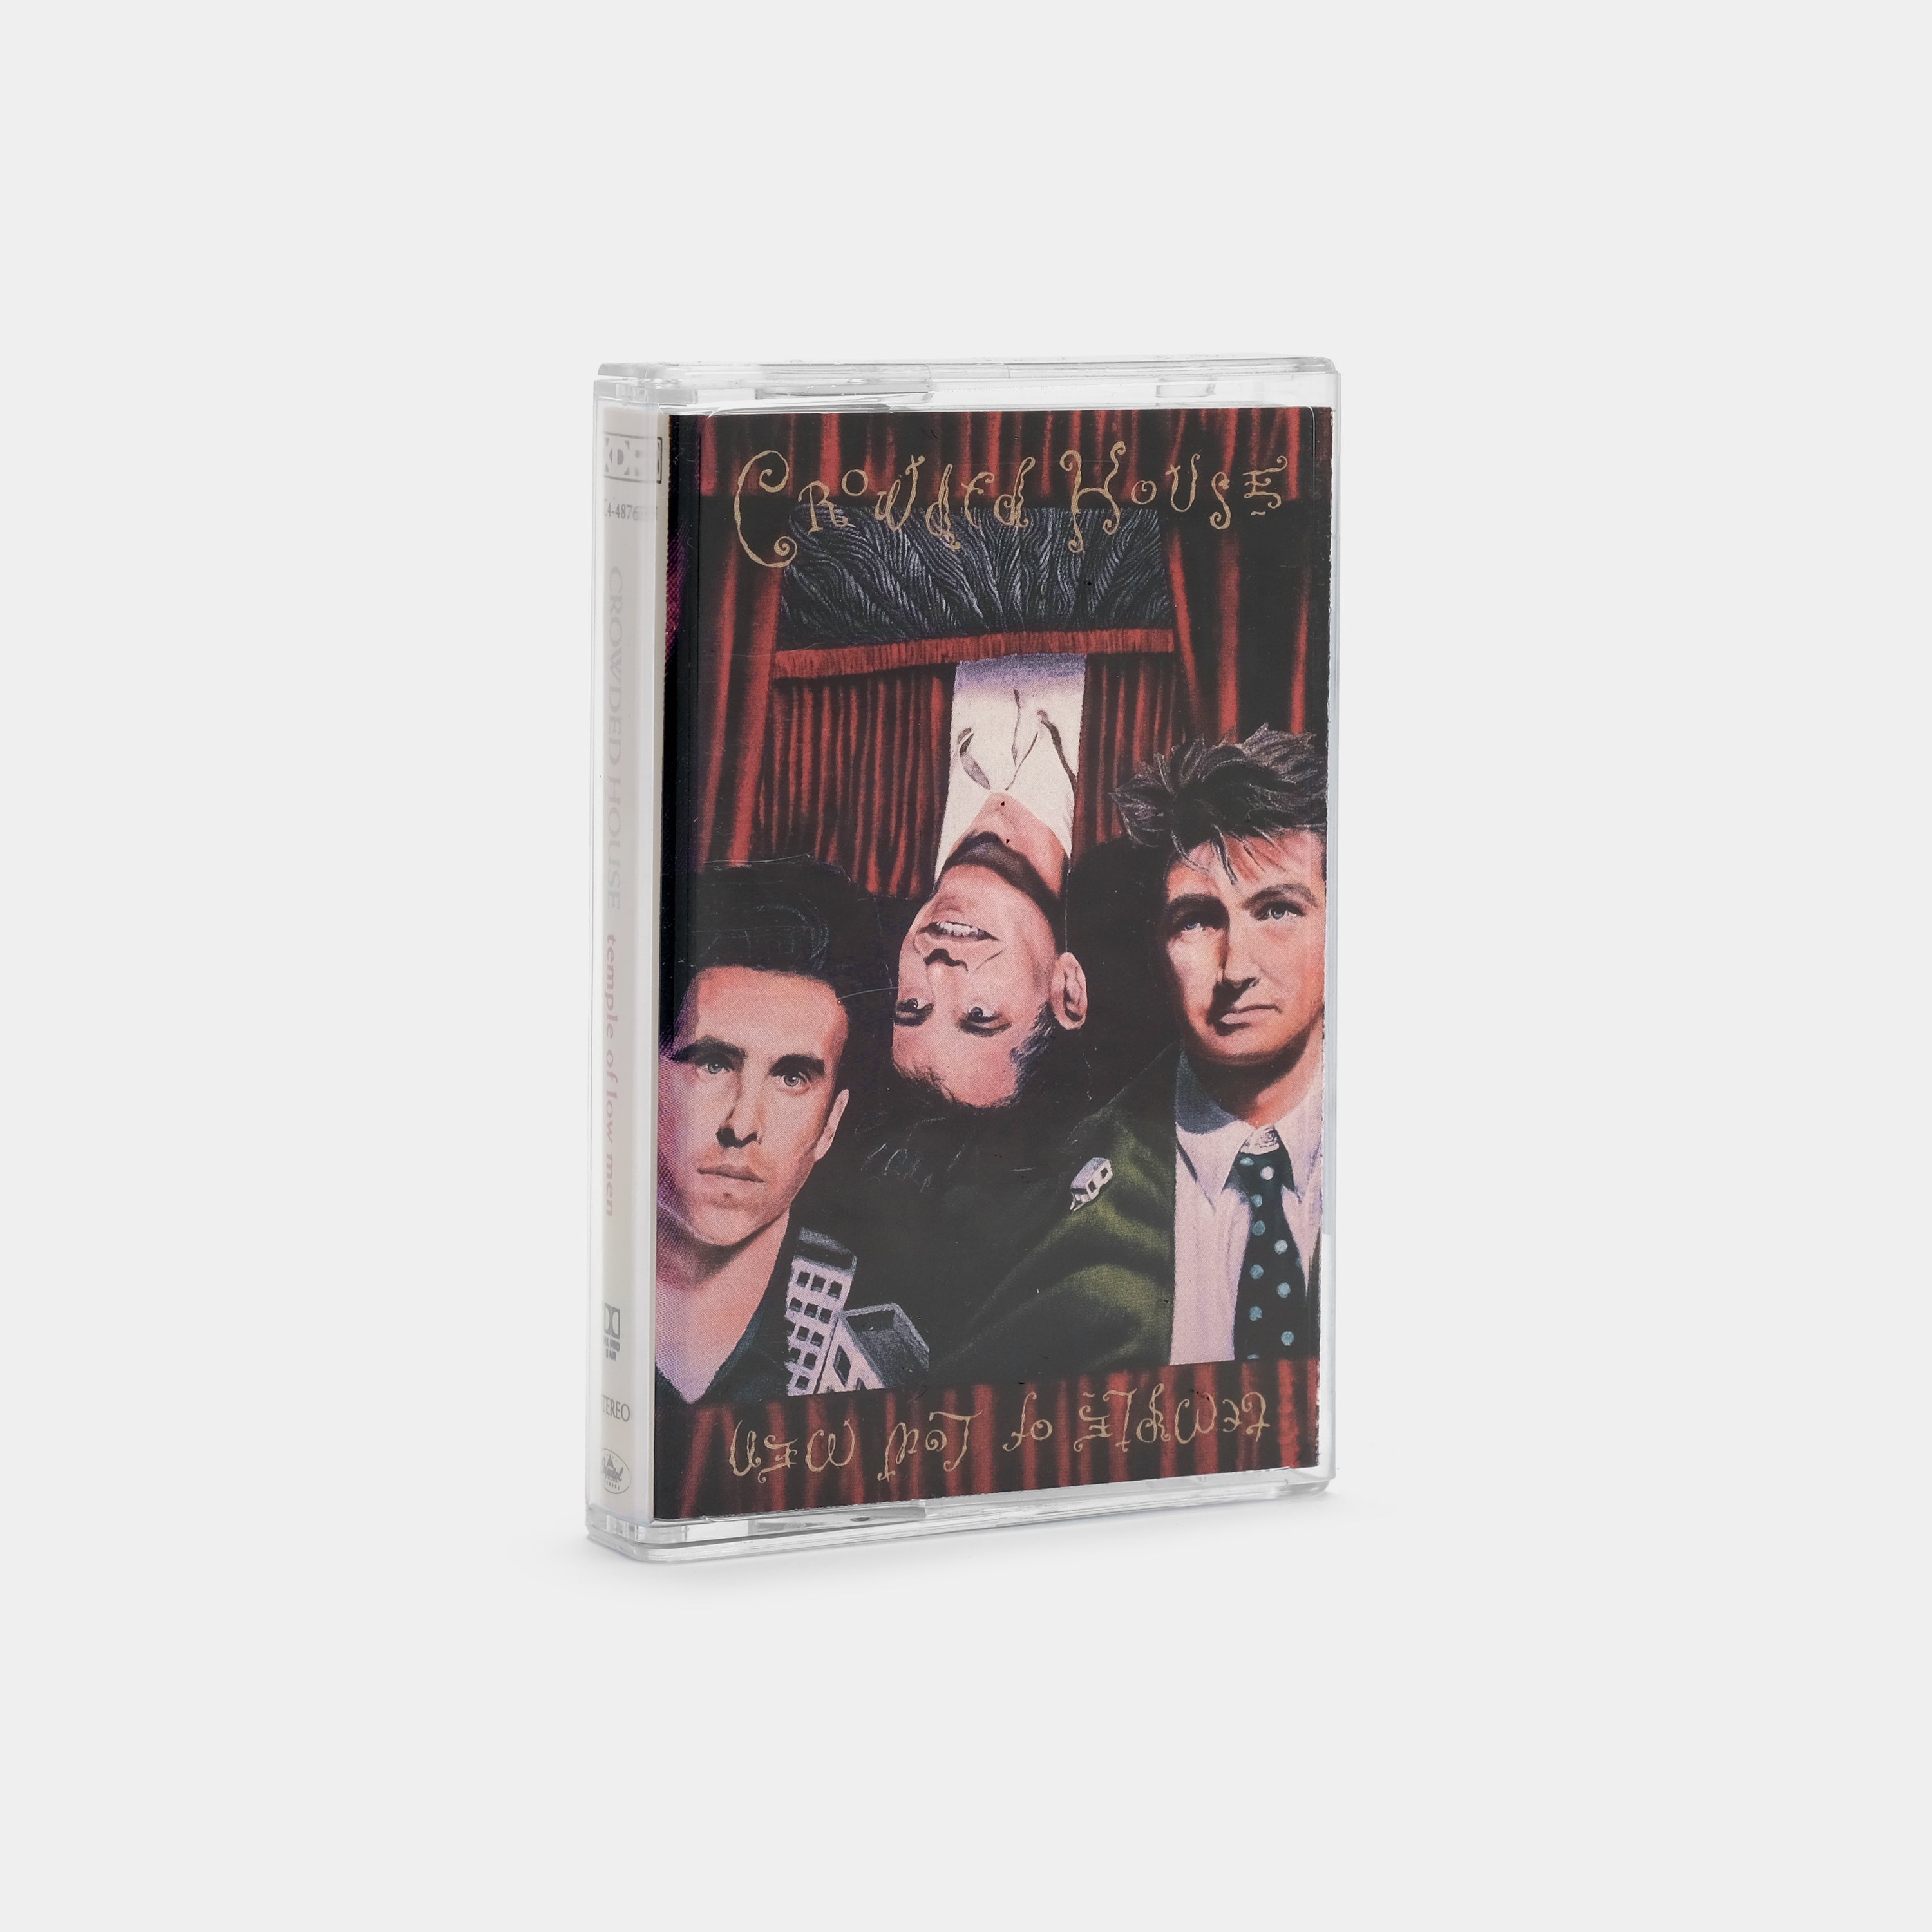 Crowded House - Temple Of Low Men Cassette Tape